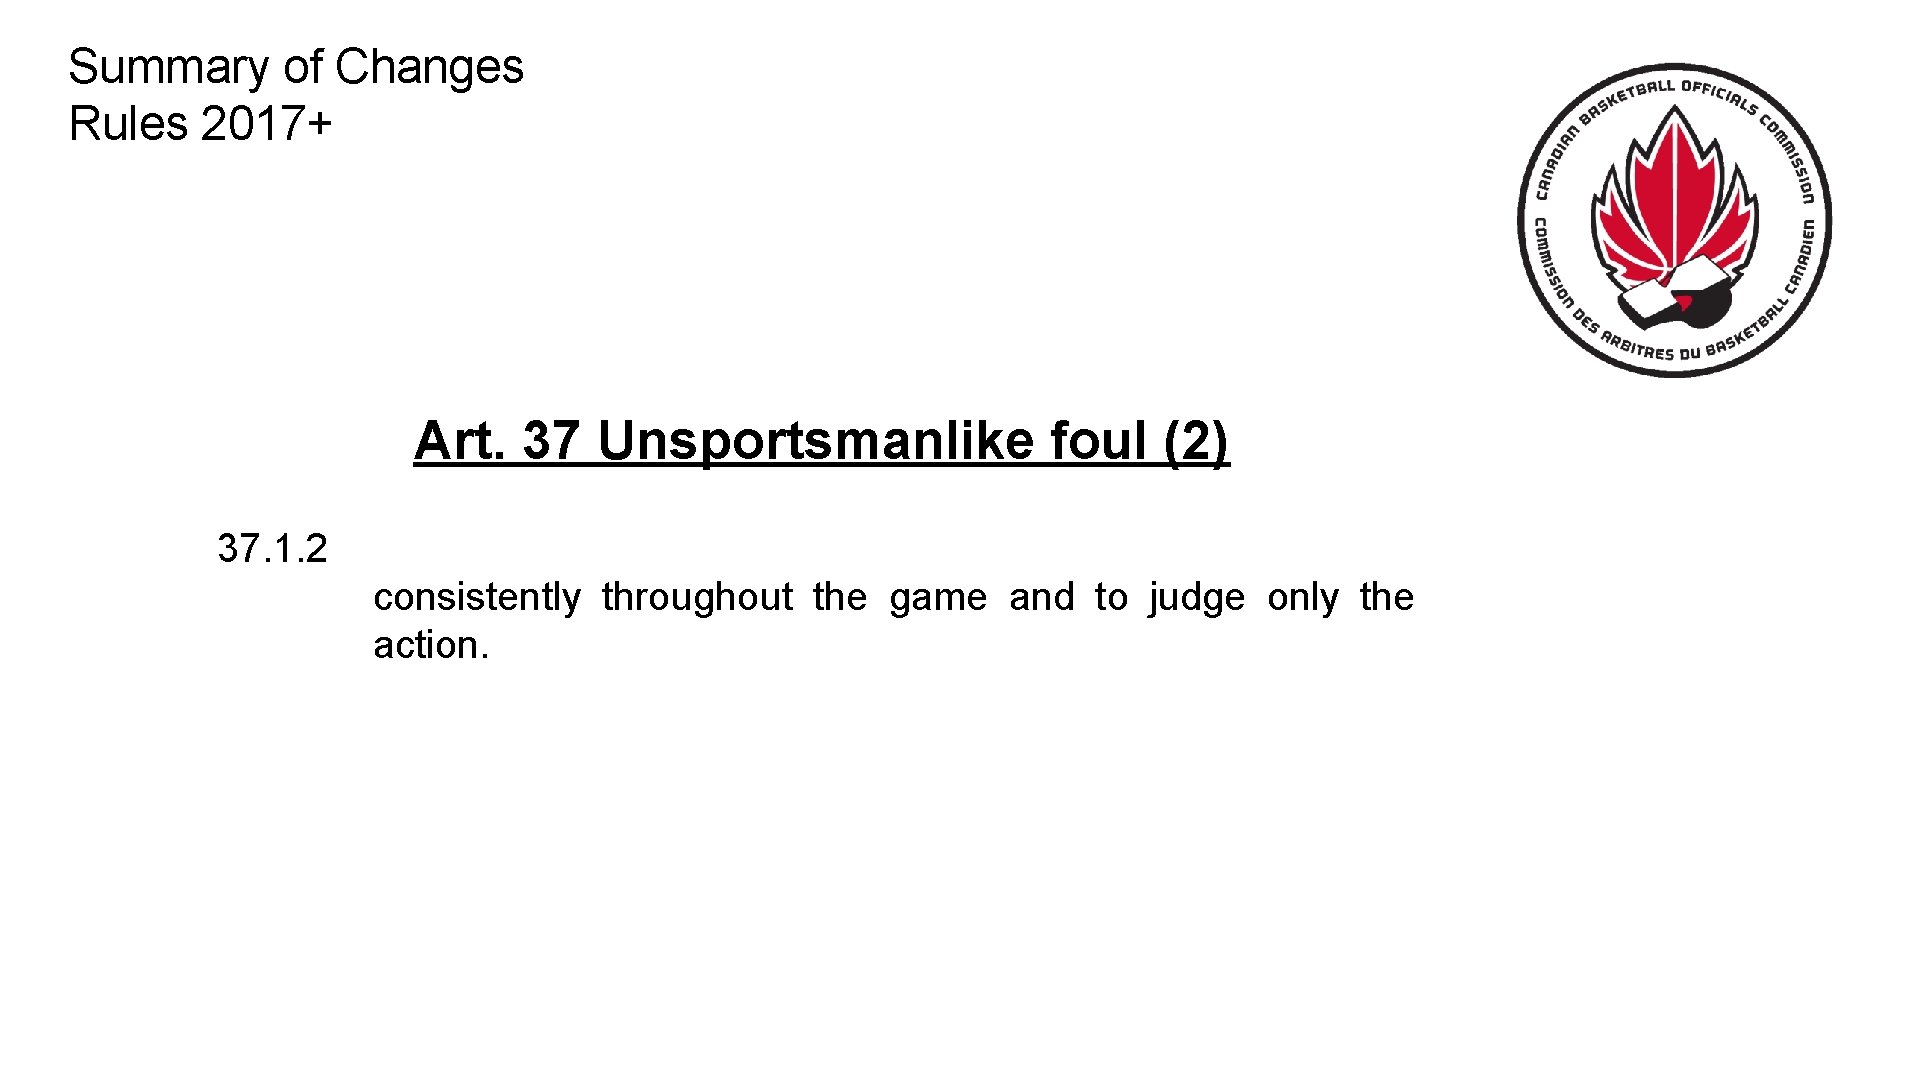 Summary of. ART. Changes 37 UNSPORTSMANLIKE FOUL Rules 2017+ Art. 37 Unsportsmanlike foul (2)